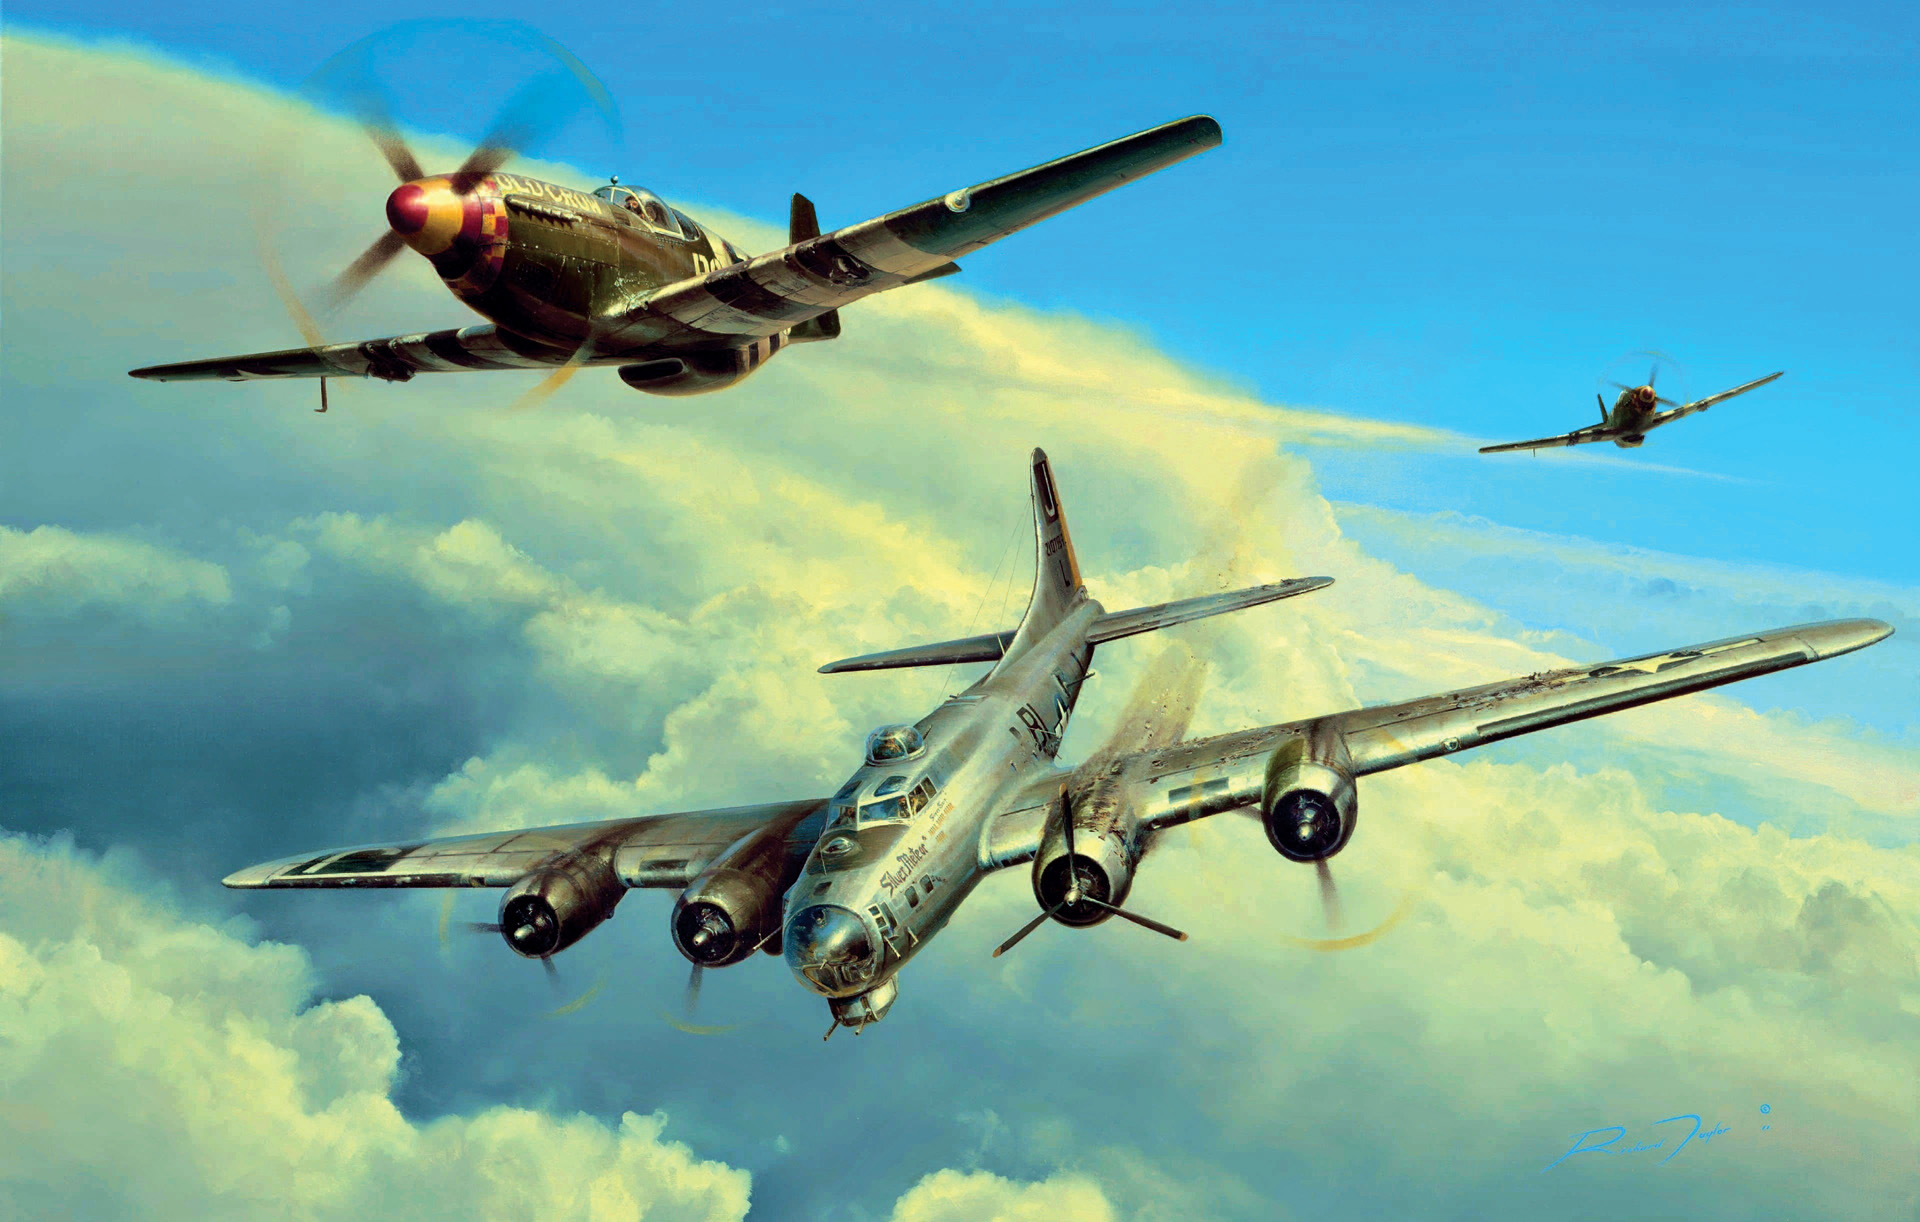 In this painting titled Wounded Warrior by artist Richard Taylor, the Boeing B-17 Flying Fortress nicknamed Silver Meteor, heavily damaged during a raid on Munich, Germany, on July 11, 1944, is escorted safely to its base in England by a pair of North American P-51 Mustang fighters. The Mustang provided long-range escort for the heavy bombers penetrating deep into German airspace.